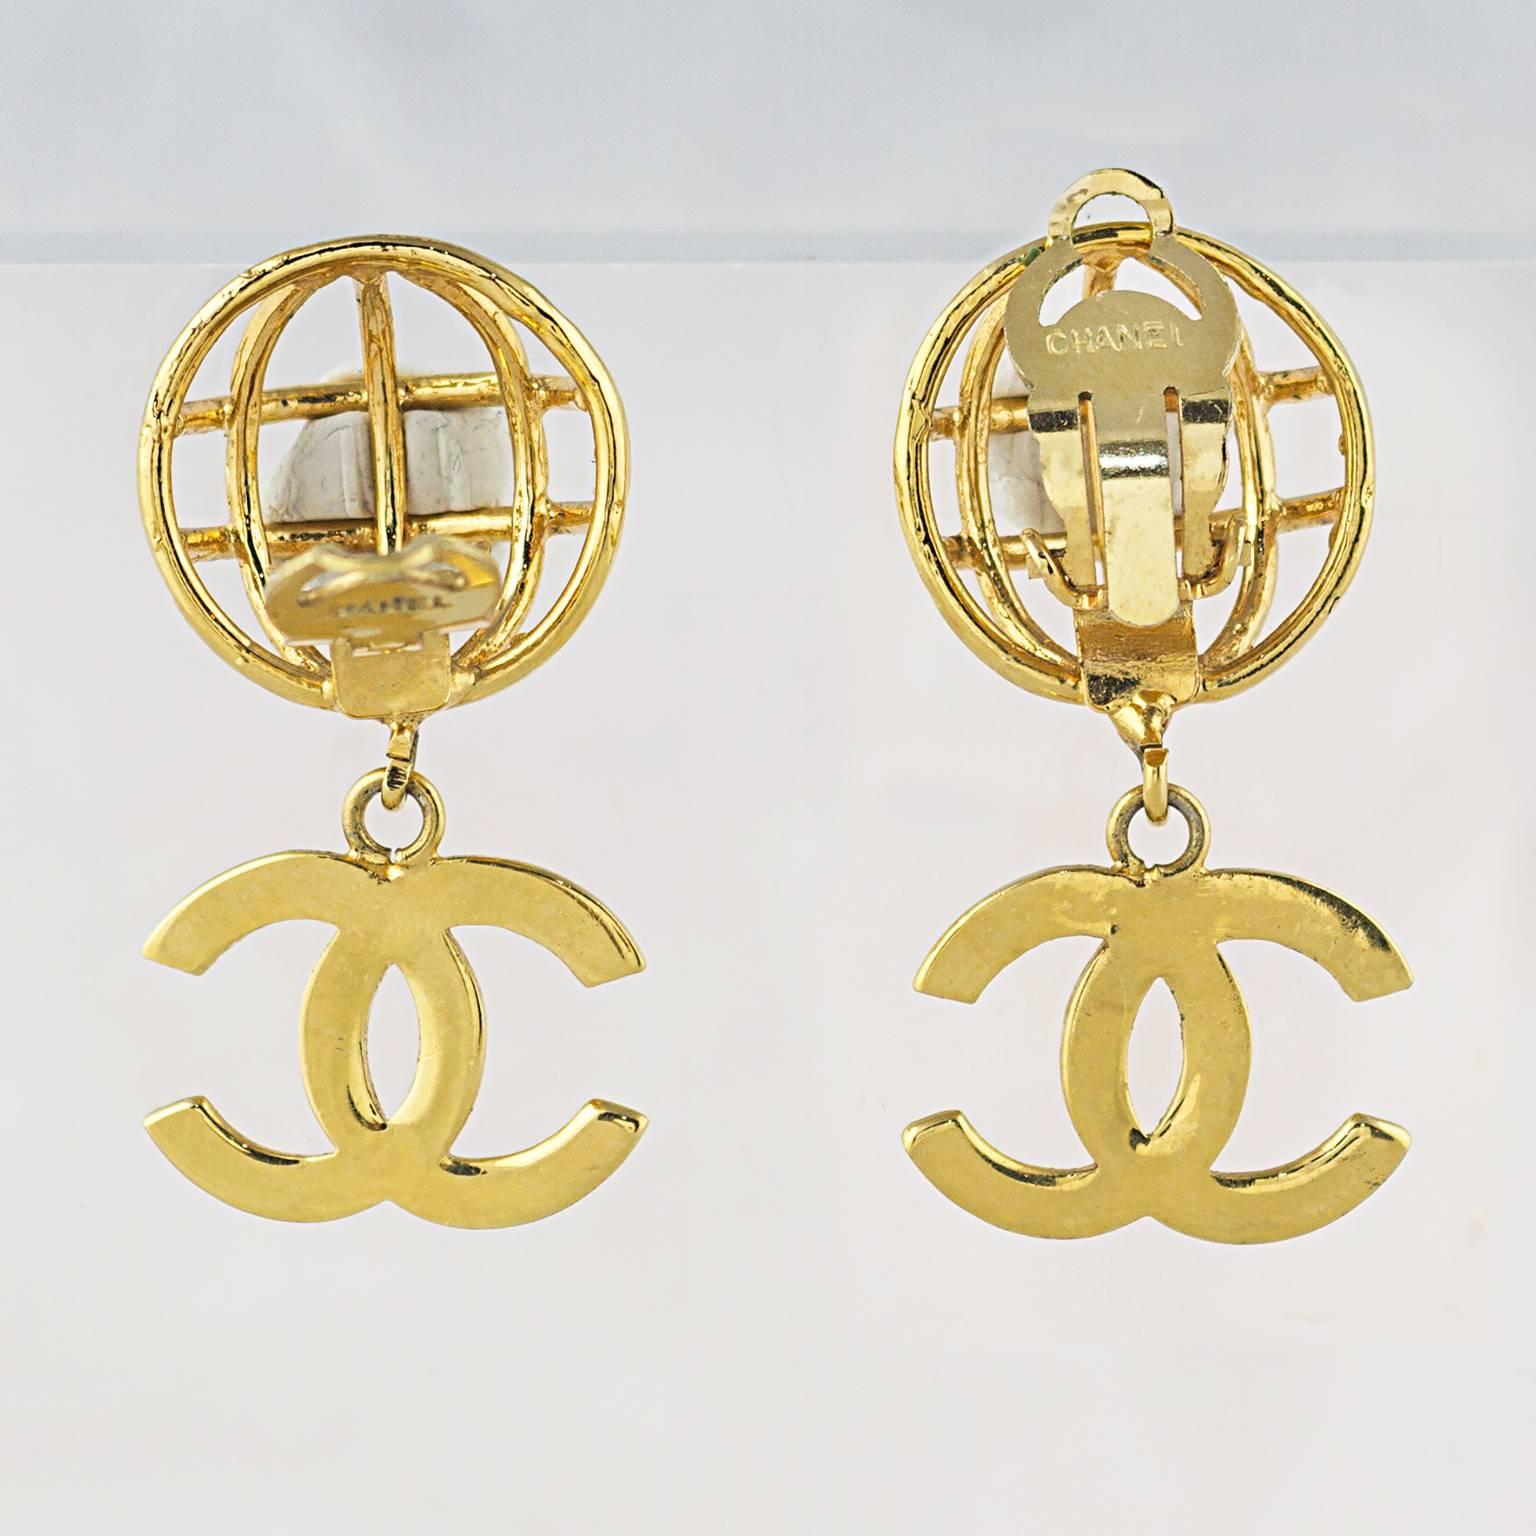 A pair of sought after, collectable Chanel clip-on cage earrings in gold plate.
Made in the 1980's.
Fully signed.  
In an exceptional condition. 
Don't hesitate to contact us with any queries or image requests.